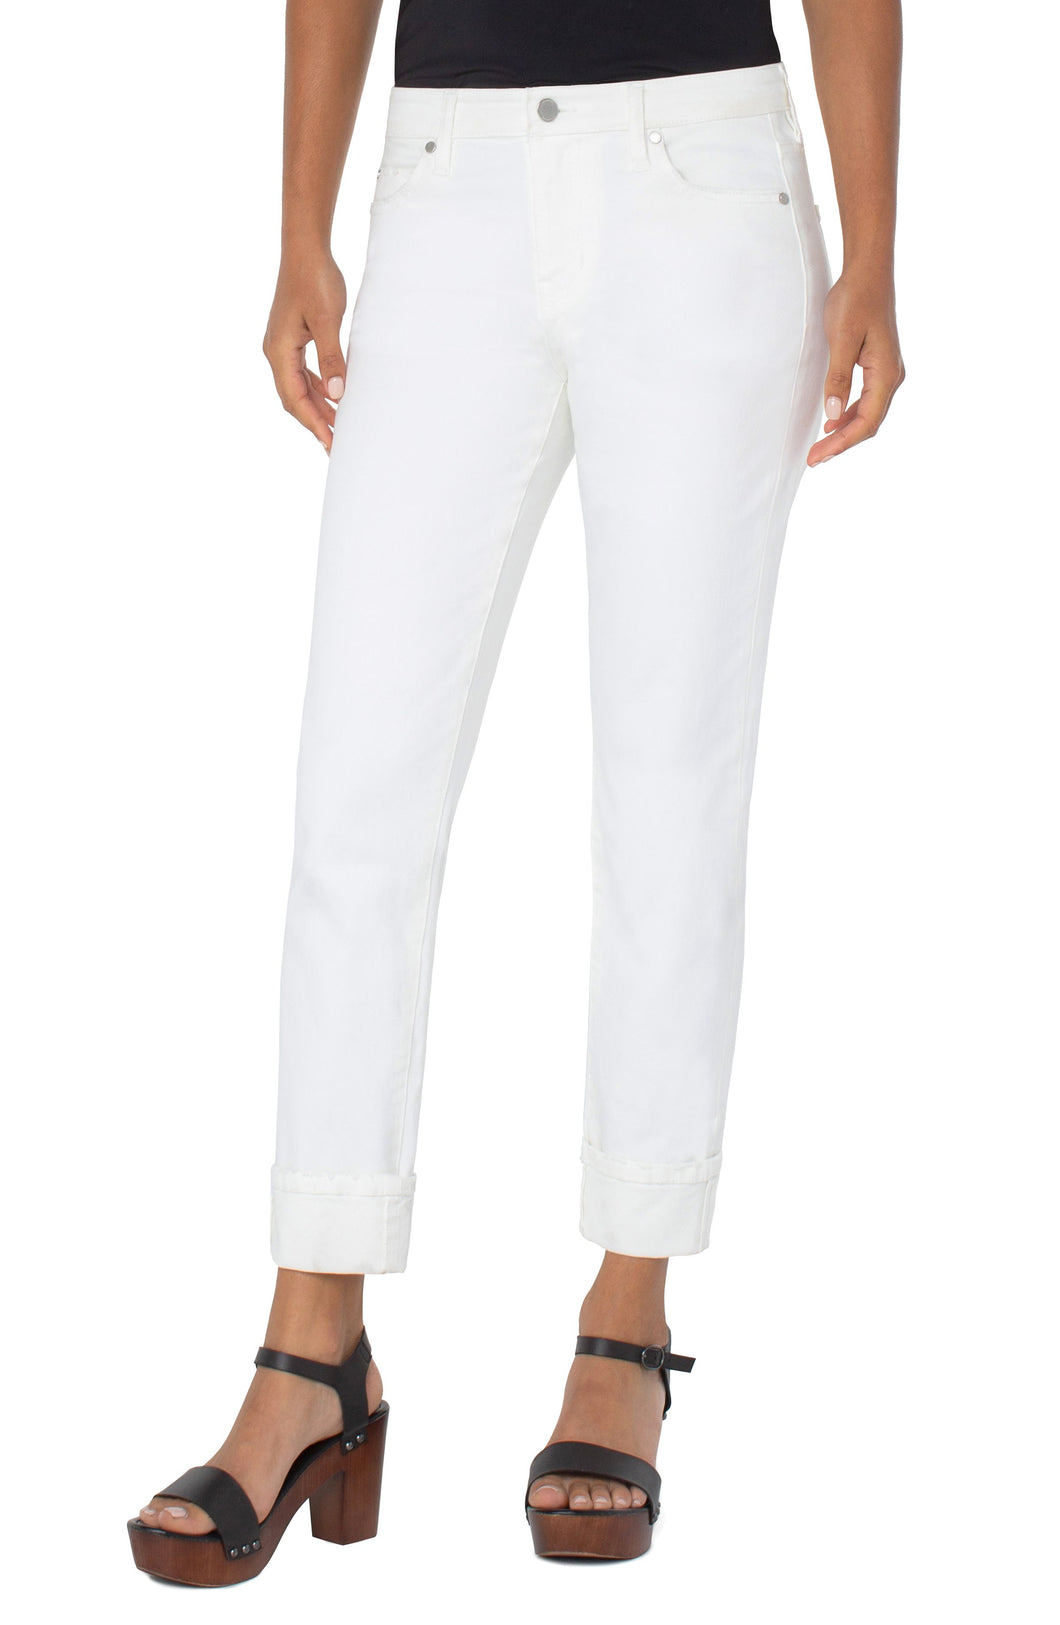 Liverpool Los Angeles now offers the famous Marley Girlfriend in WHITE! This girlfriend jean is the perfect silhouette, offering just the right amount of room from mid-thigh to the cuffed hem. Super comfortable with amazing stretch. This fabulous jean is a must for your wardrobe as it goes with essentially everything in your closet!  Color- Bone white. Mid-rise. 5 functional pocket styling details. Single logo button closure. Belt loops.